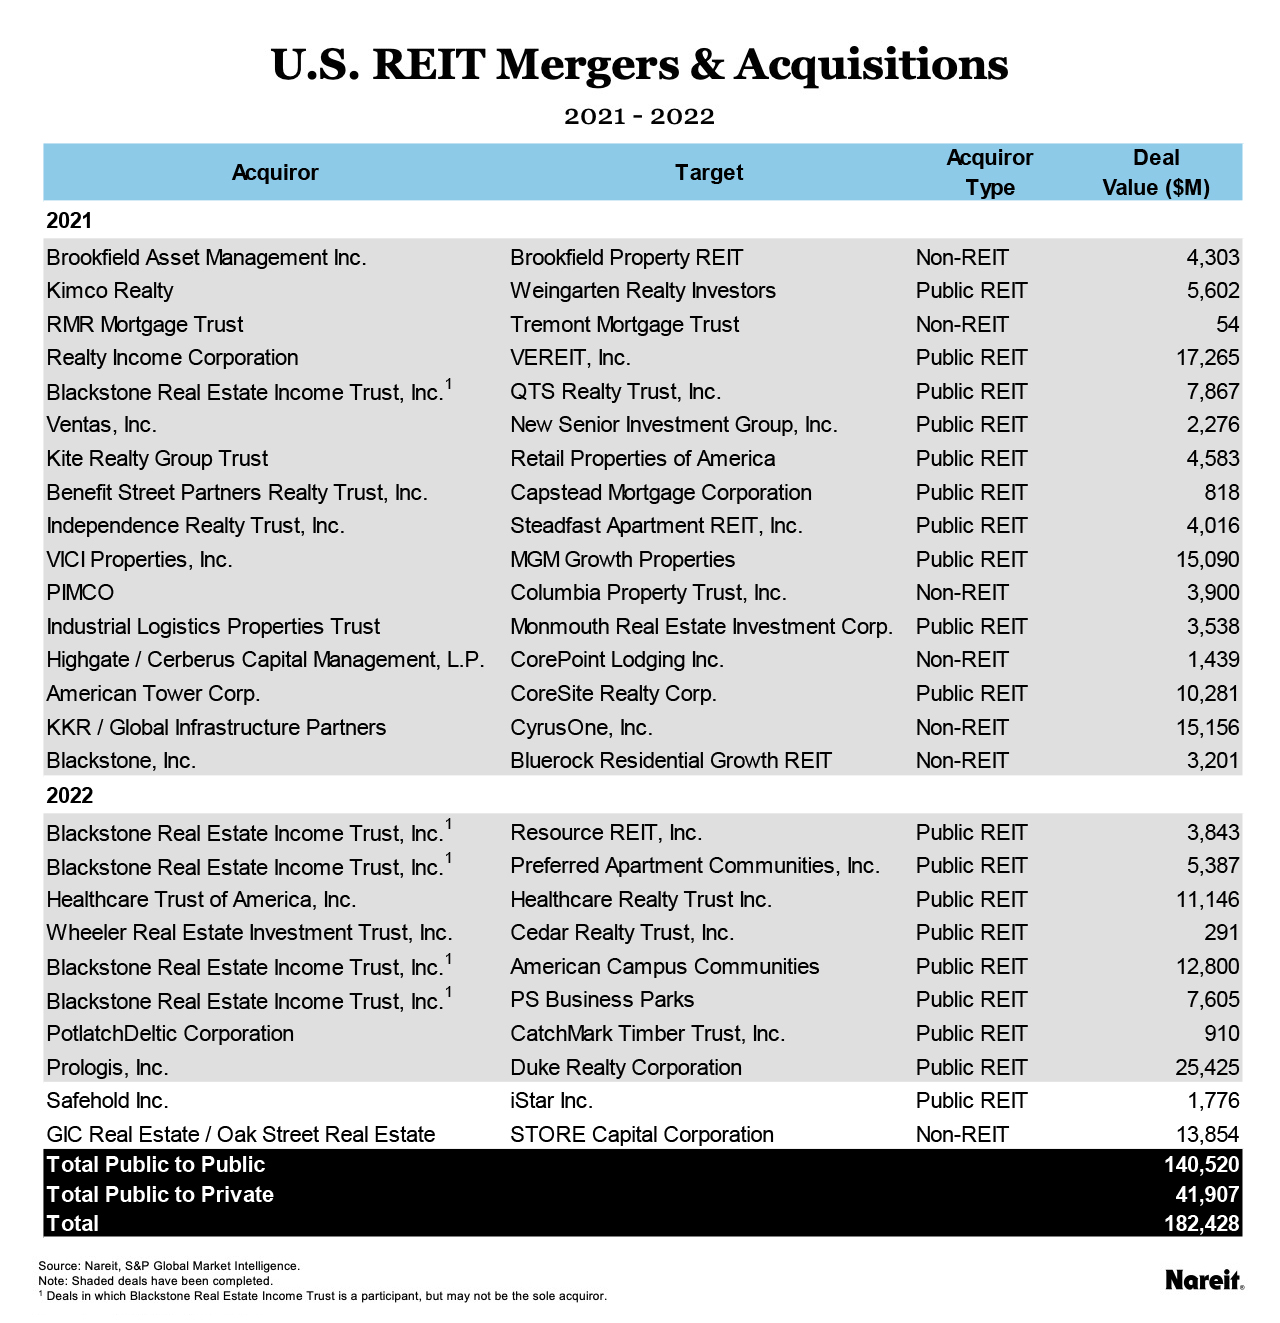 U.S REIT Mergers and Acquisitions Chart